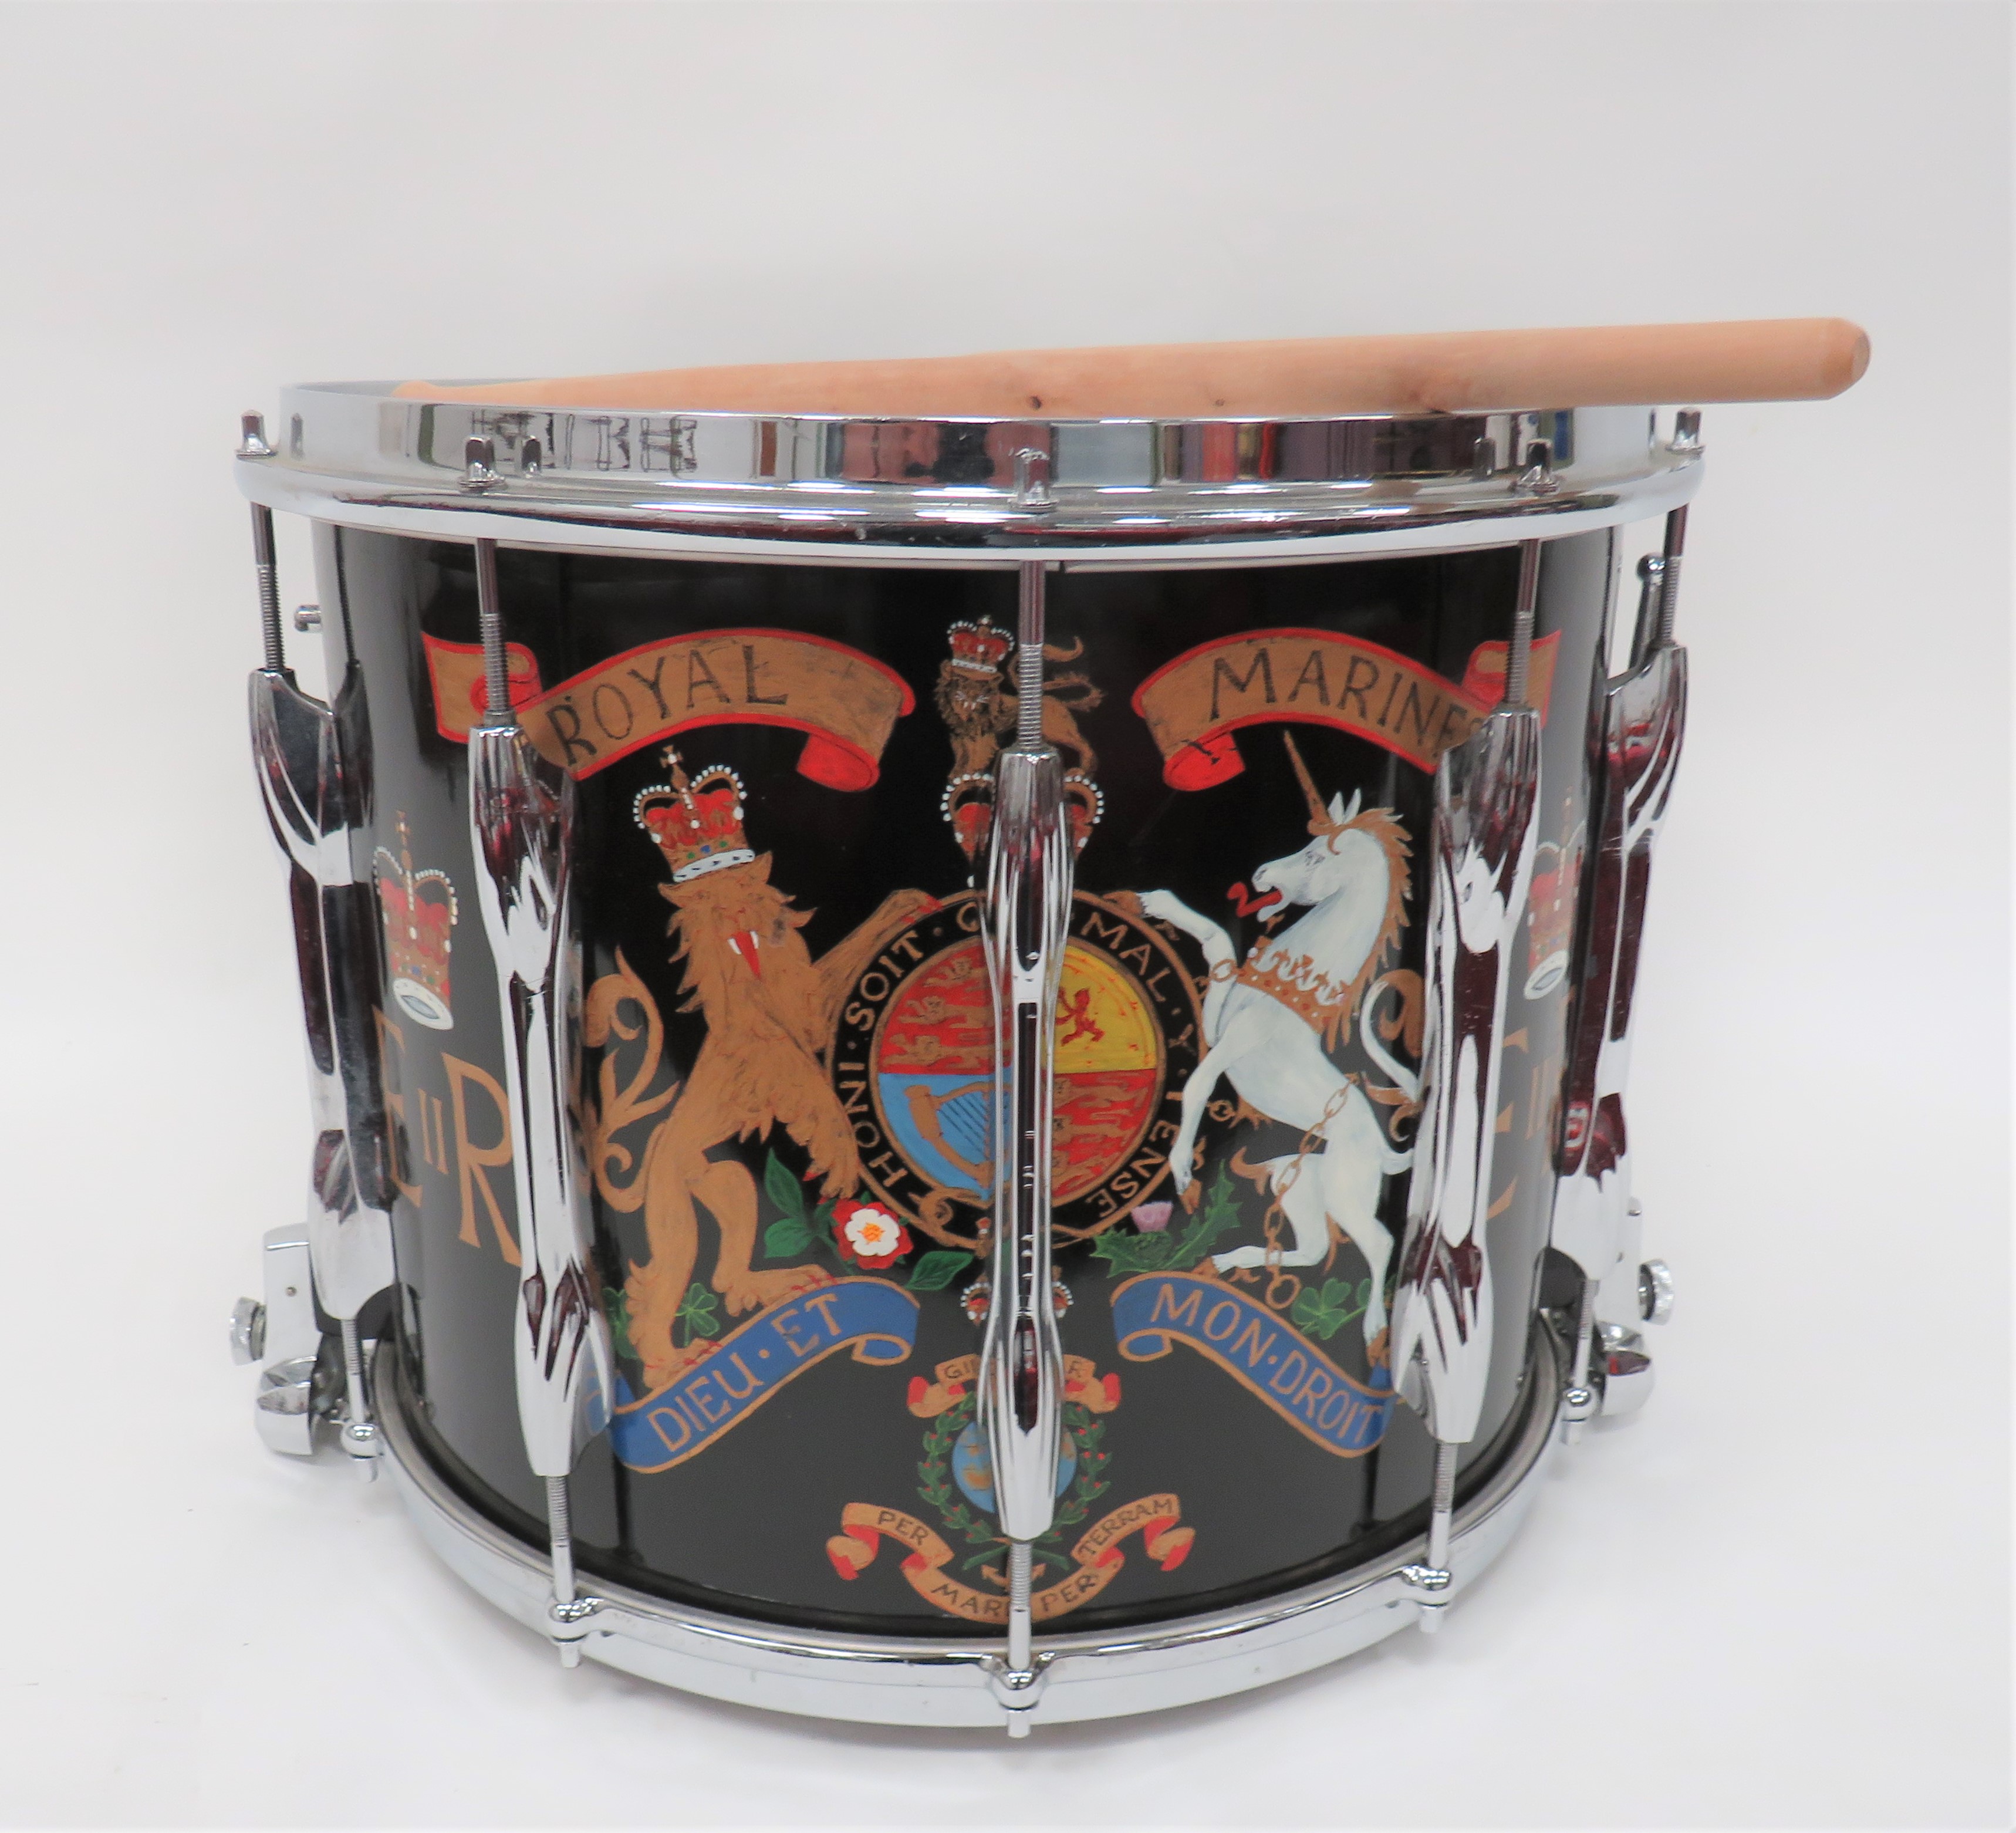 Current Royal Marines Snare Drum painted, composite body drum with hand painted, QC Royal Marines